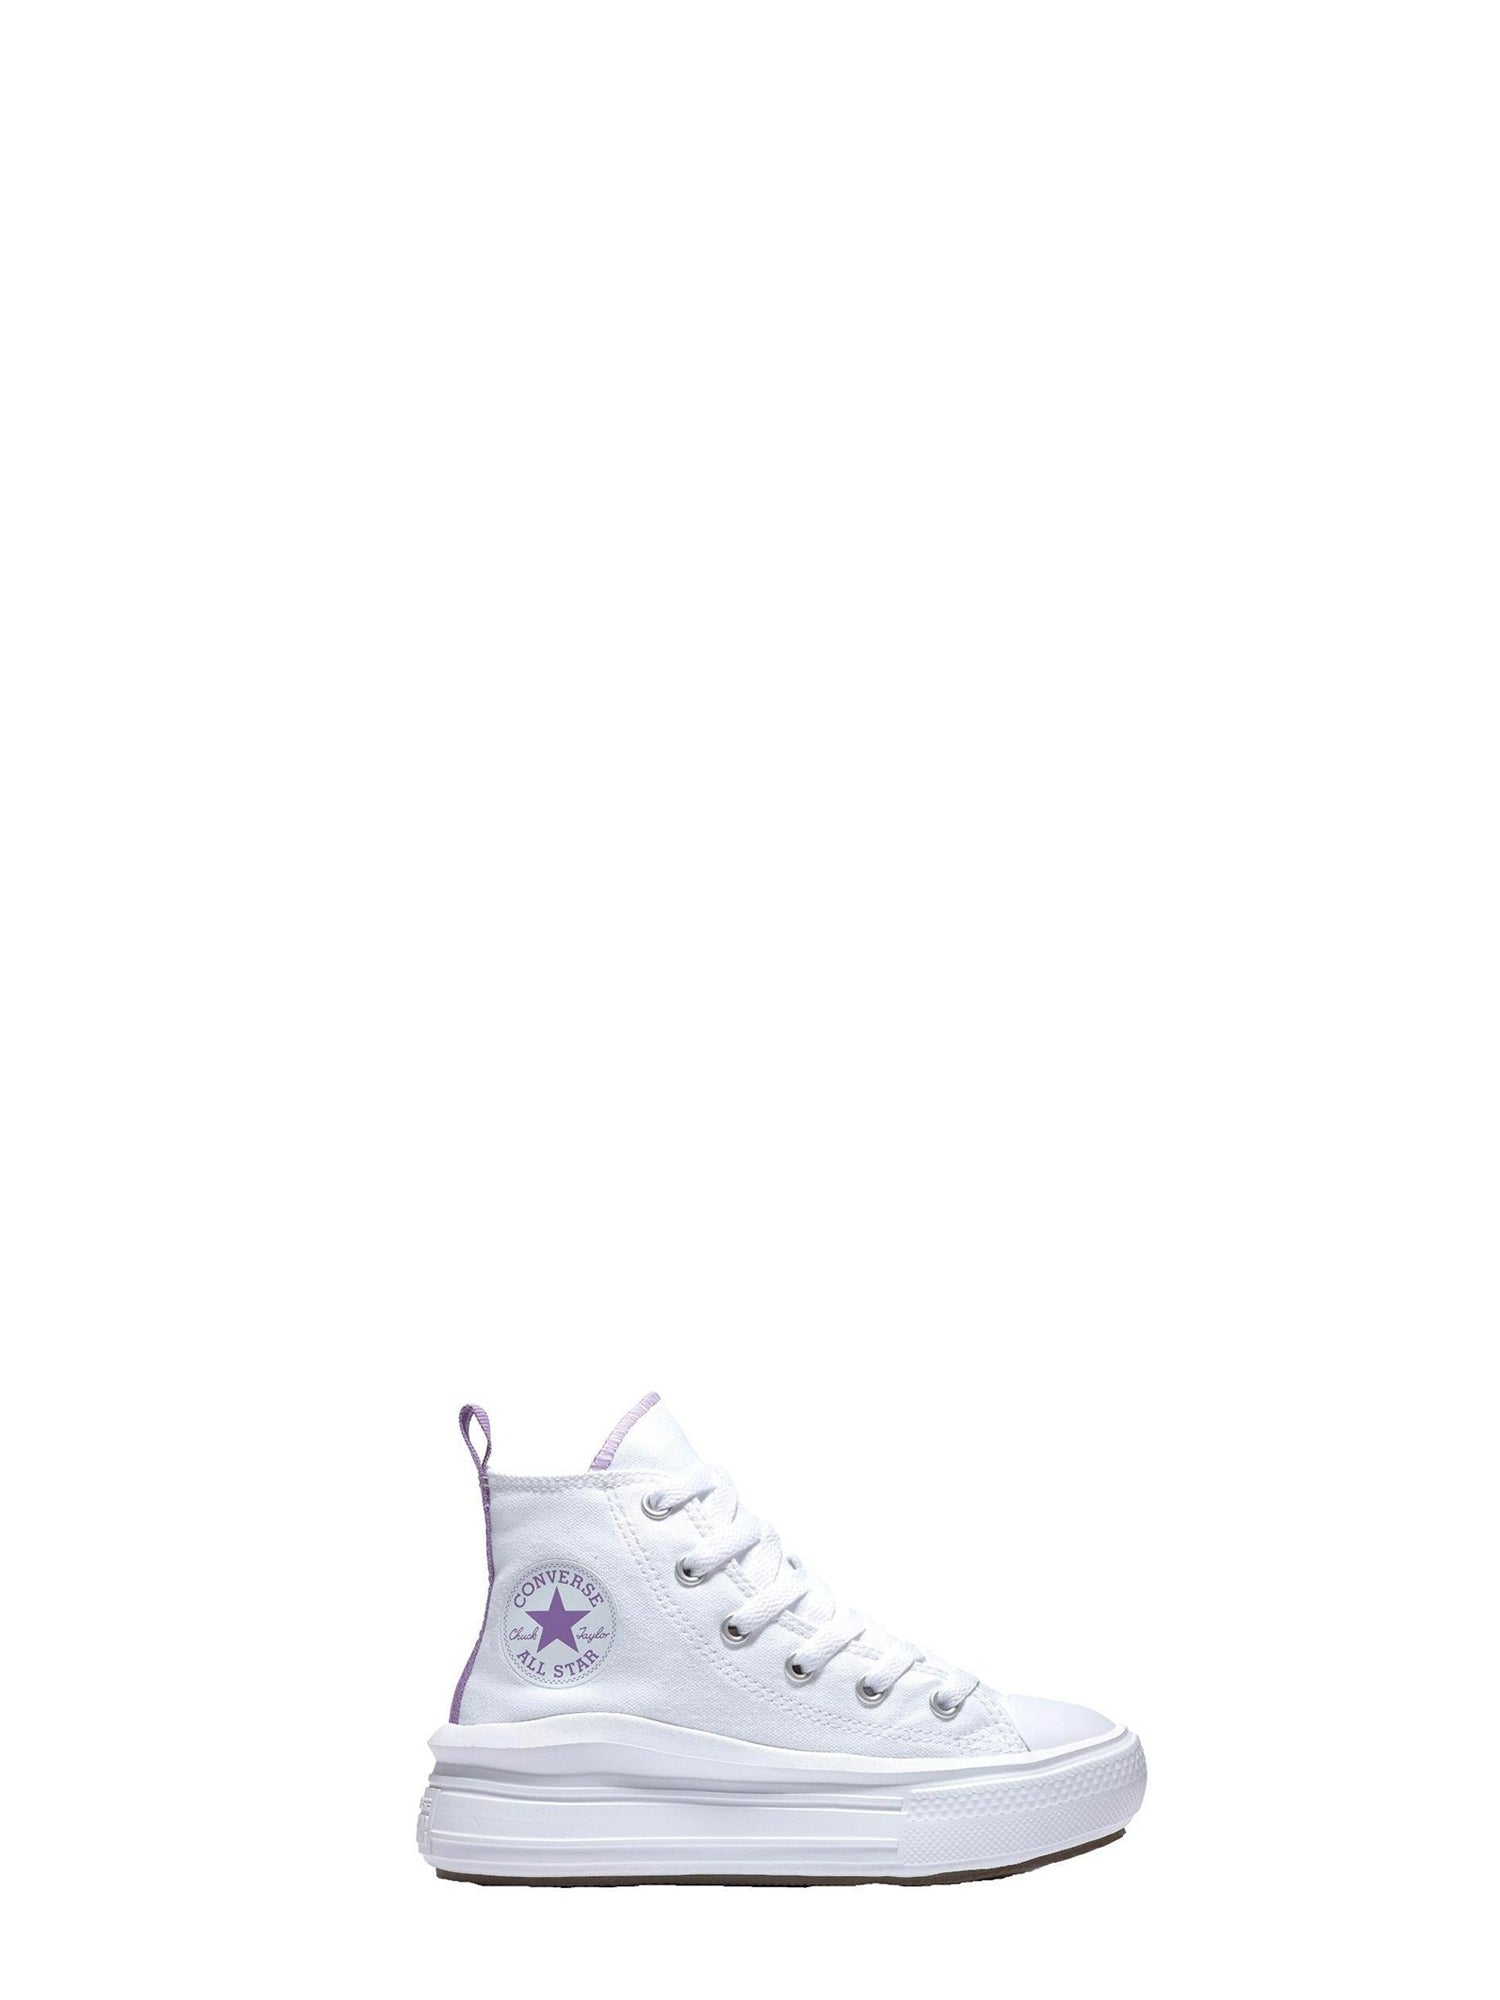 CONVERSE SNEAKERS CHUCK TAYLOR ALL STAR MOVE BIANCO